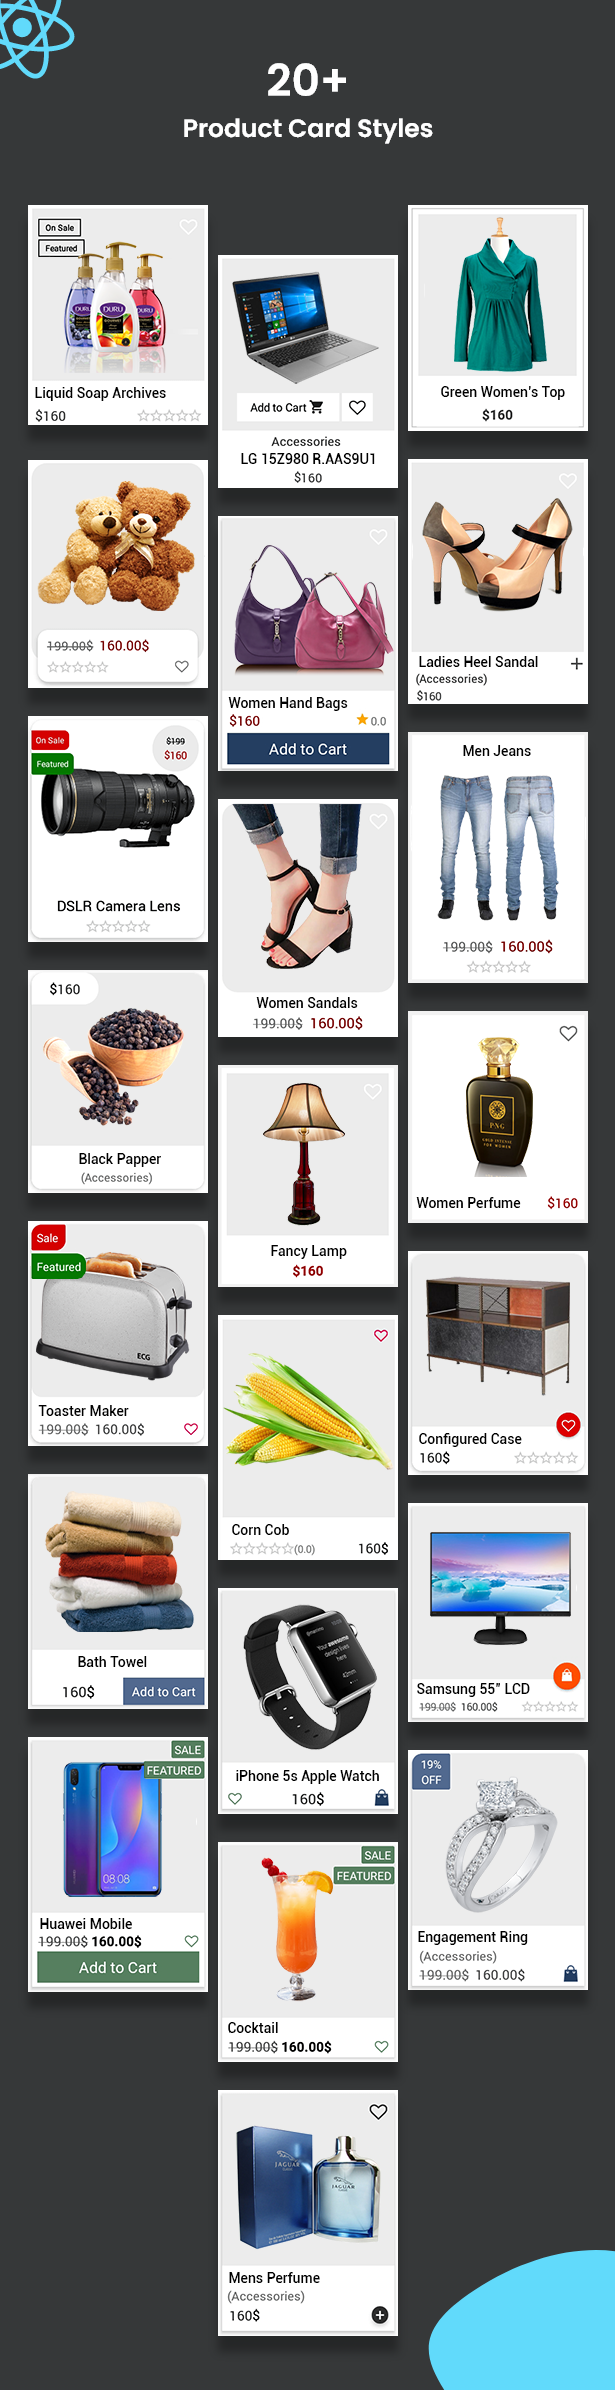 React Ecommerce - Universal iOS & Android Ecommerce / Store Full Mobile App with PHP Laravel CMS - 14